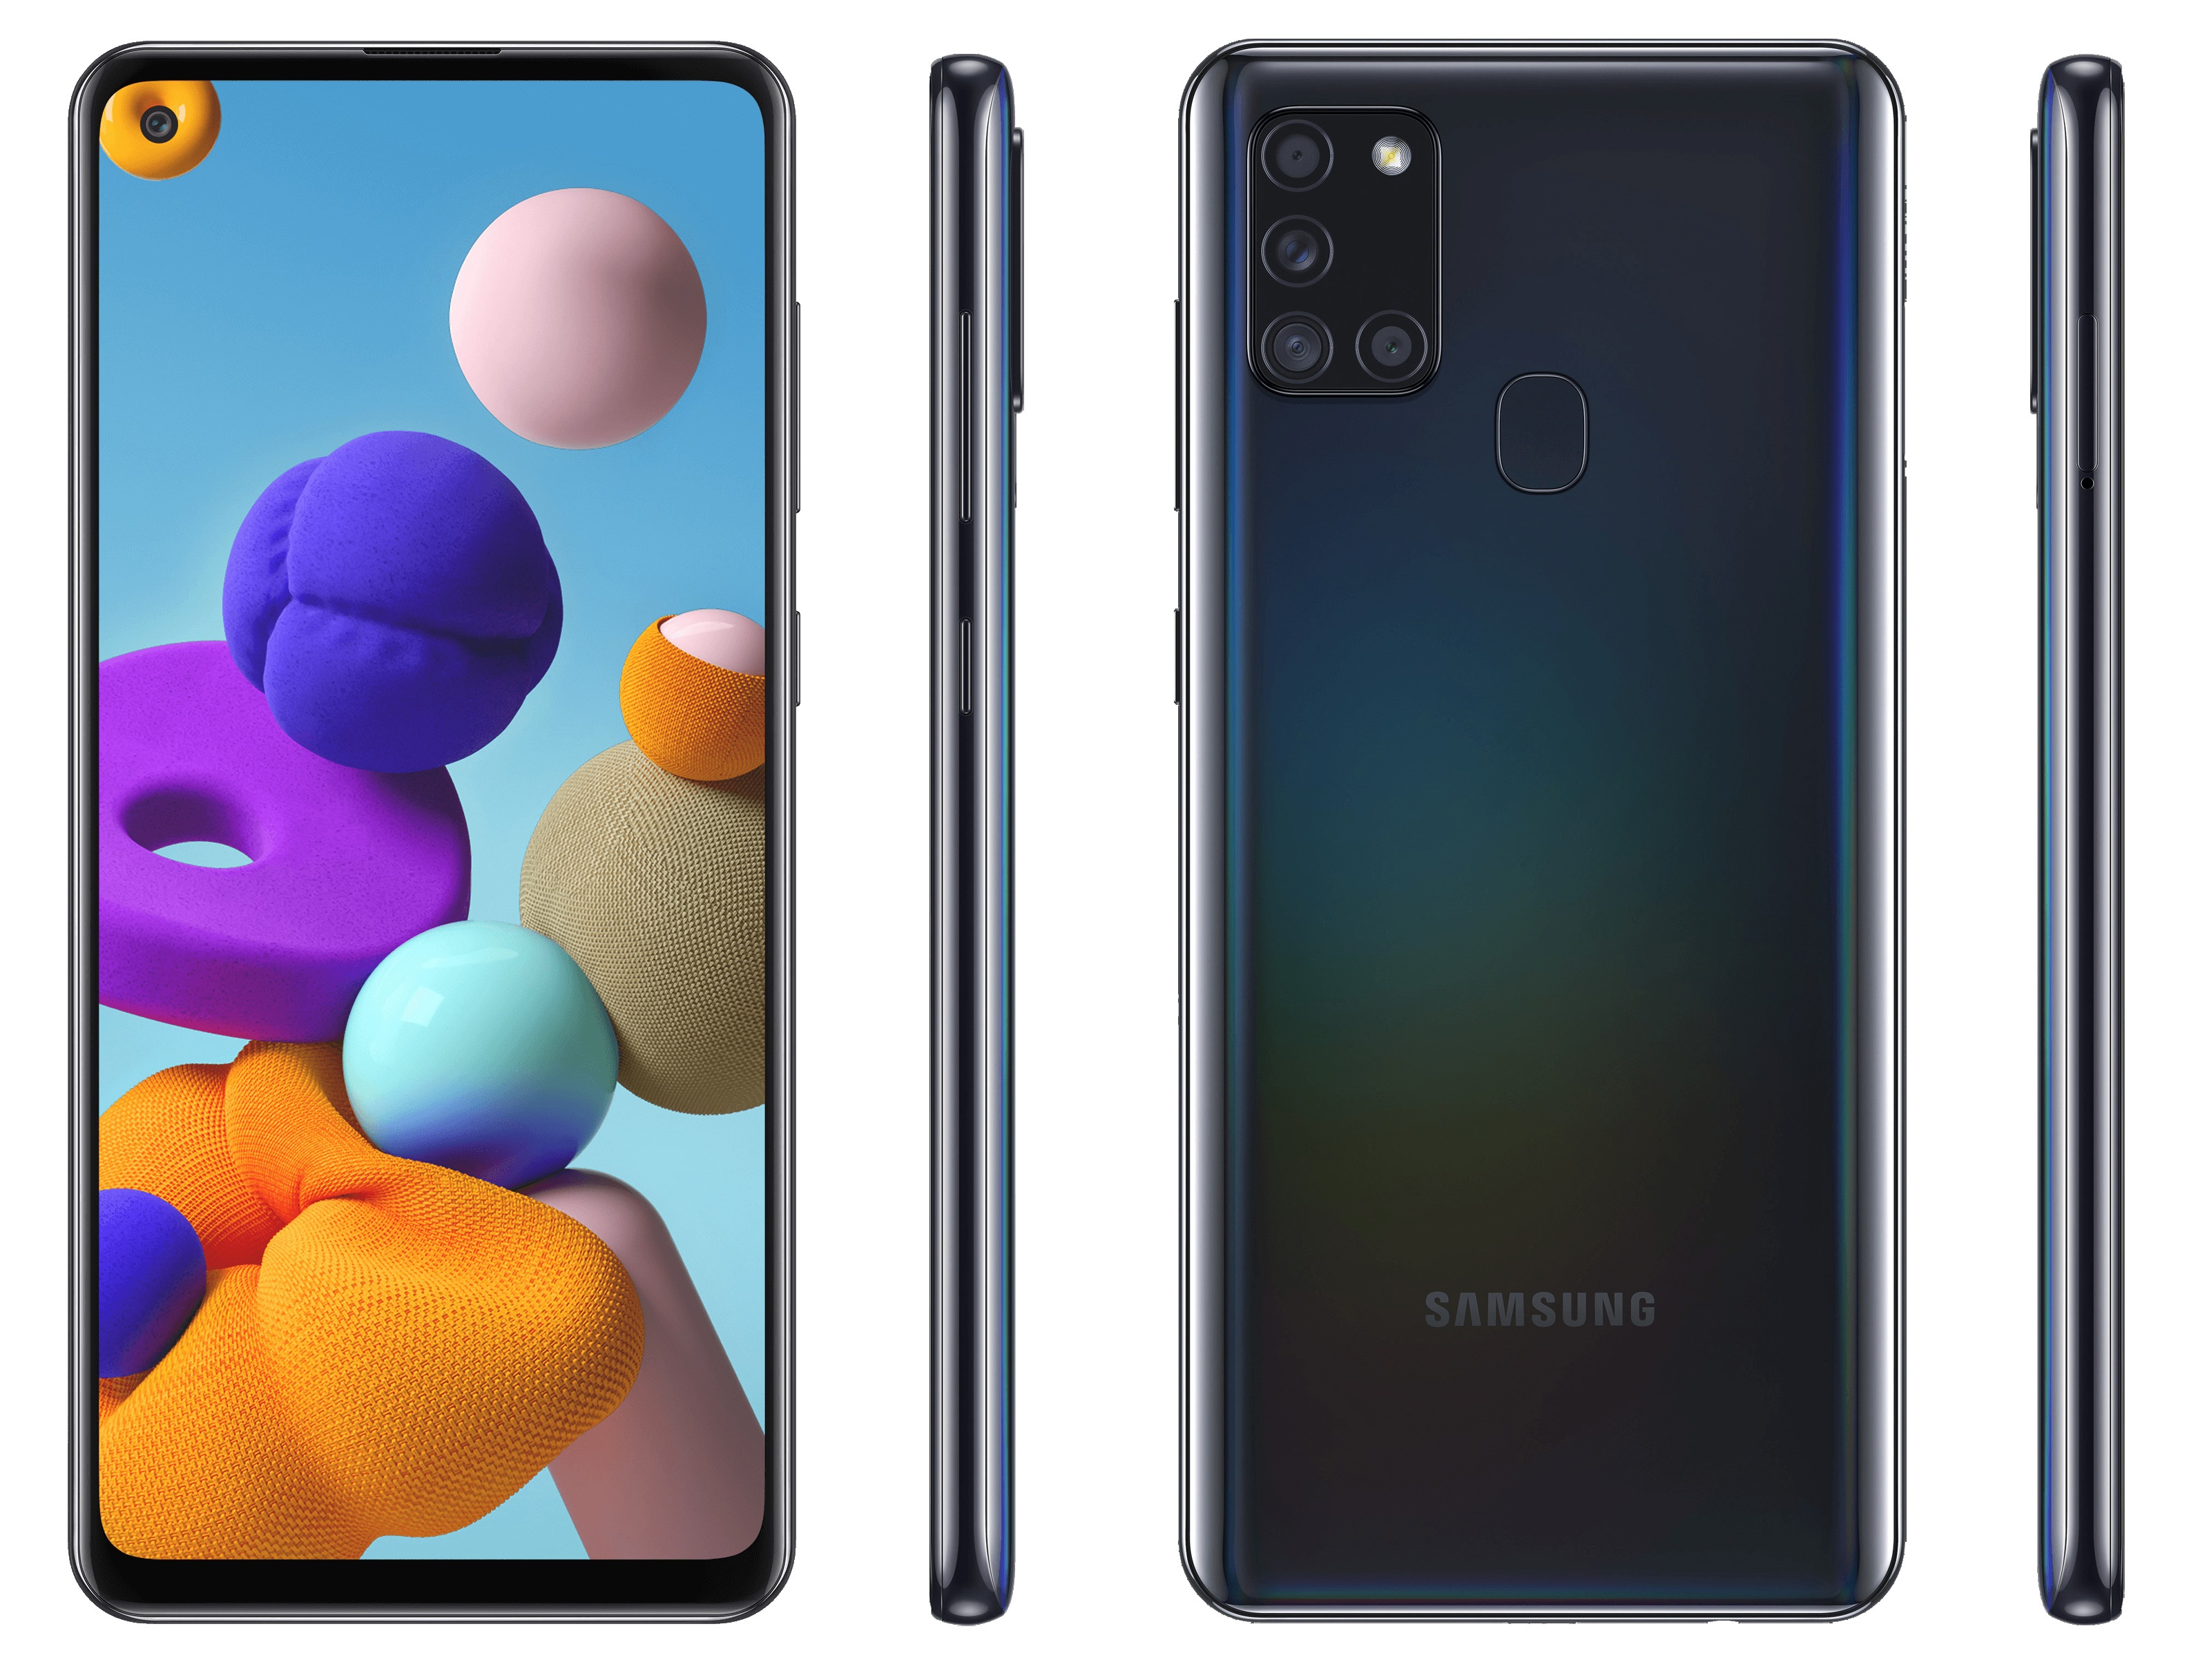 No competition for the Poco X2: Samsung Galaxy A21S